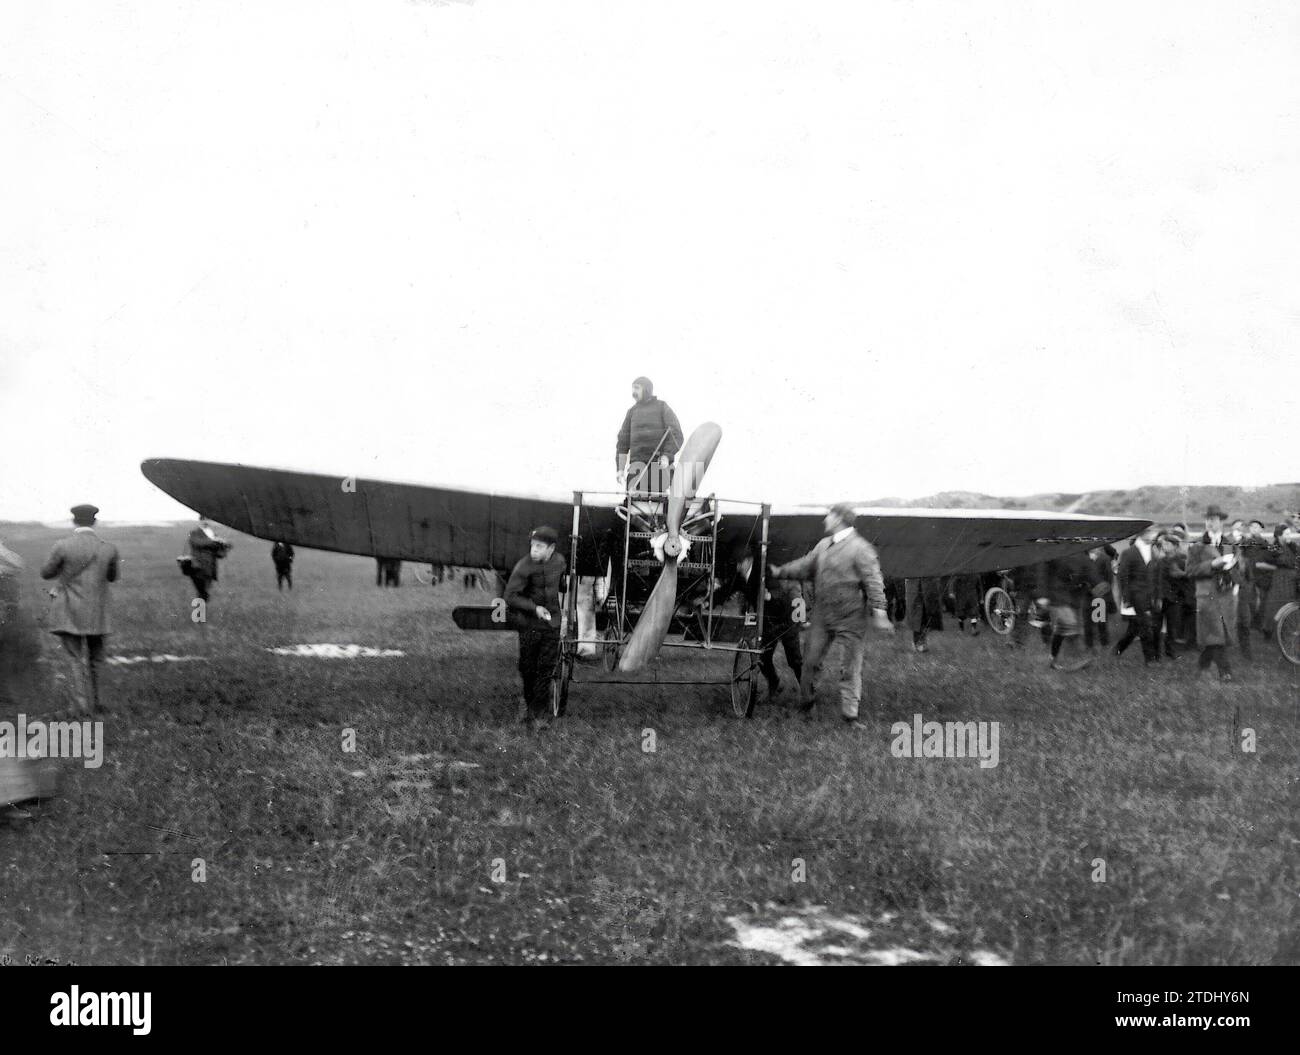 Calais (France). 07/23/1909. Historic moment when the French aviator Louis Bleriot prepares to leave Calais for Dover, on the first crossing of the English Channel. Credit: Album / Archivo ABC / Tomás de Martín Barbadillo Stock Photo